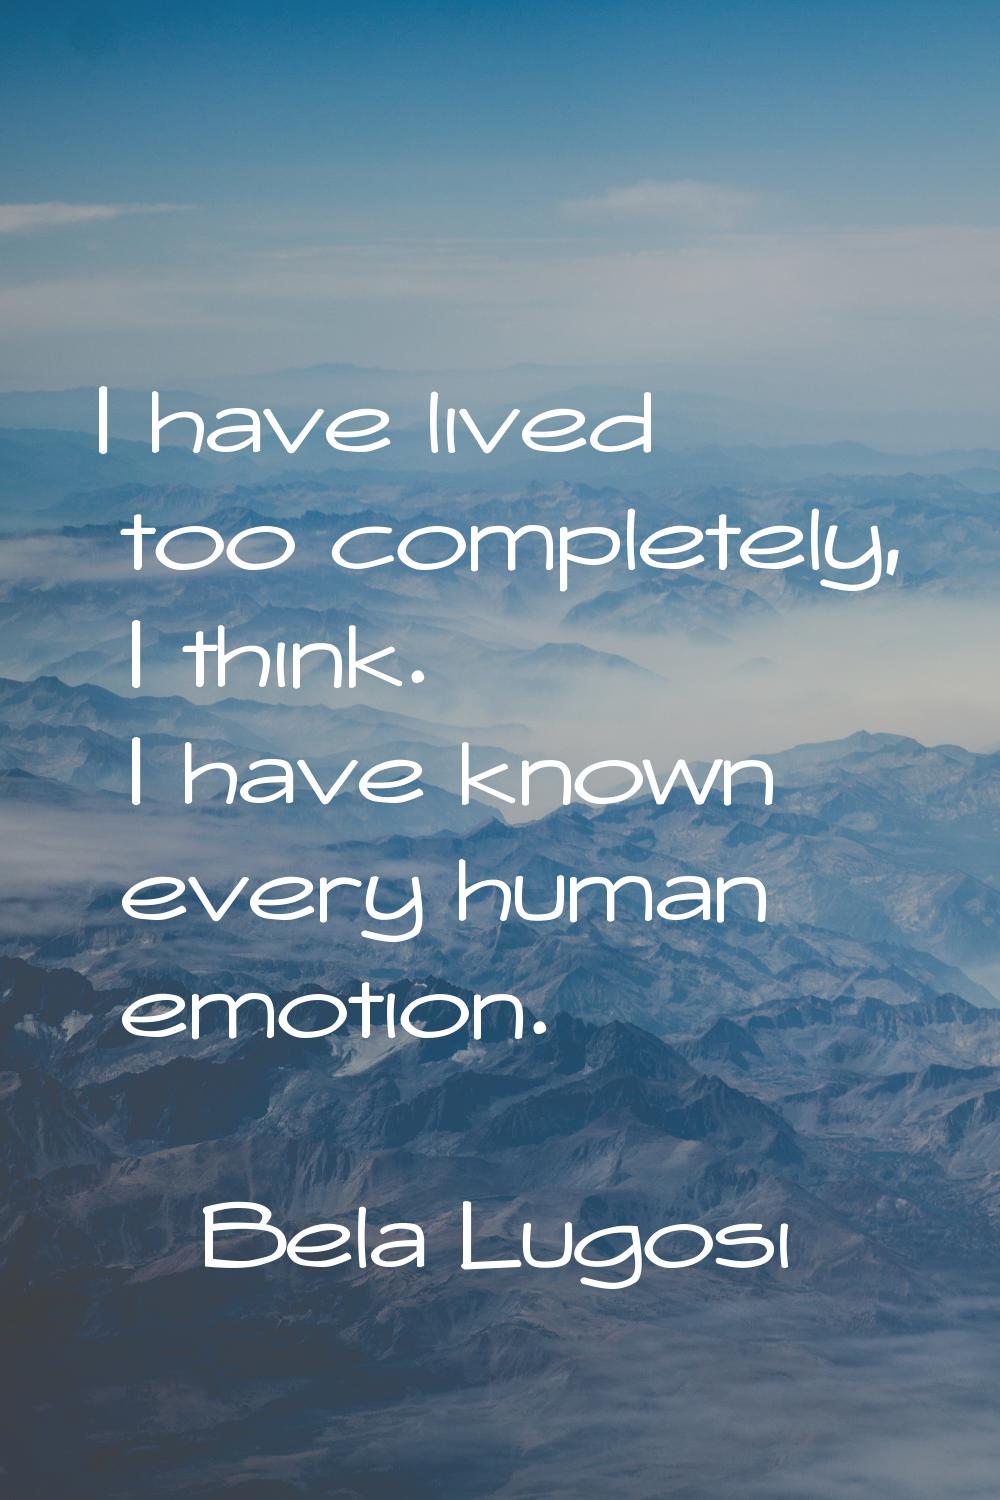 I have lived too completely, I think. I have known every human emotion.